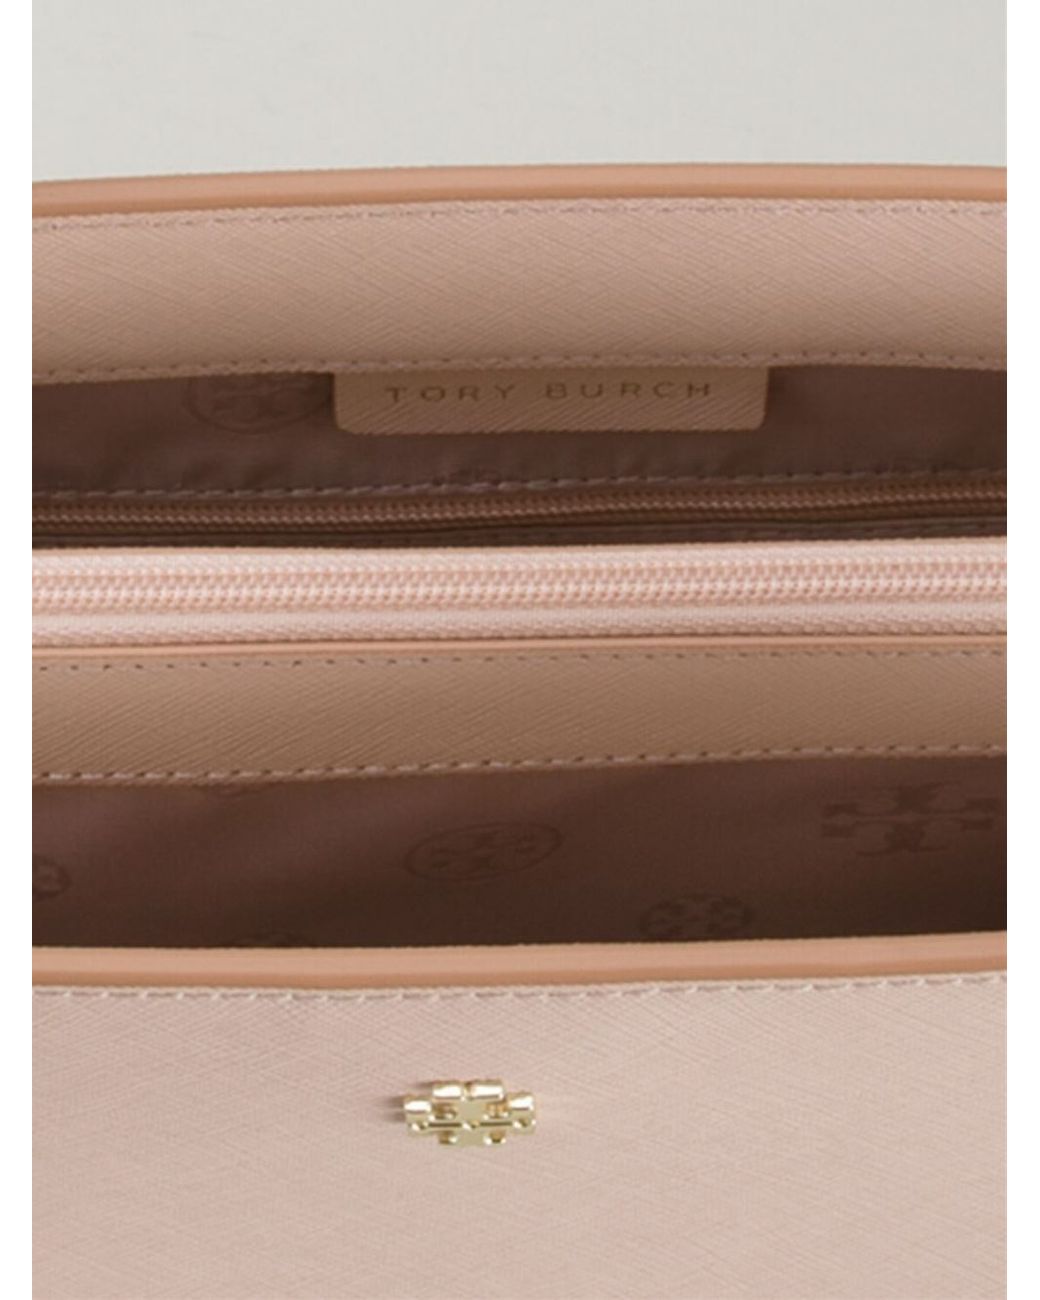 Tory Burch 'York' Buckle Tote in Pink